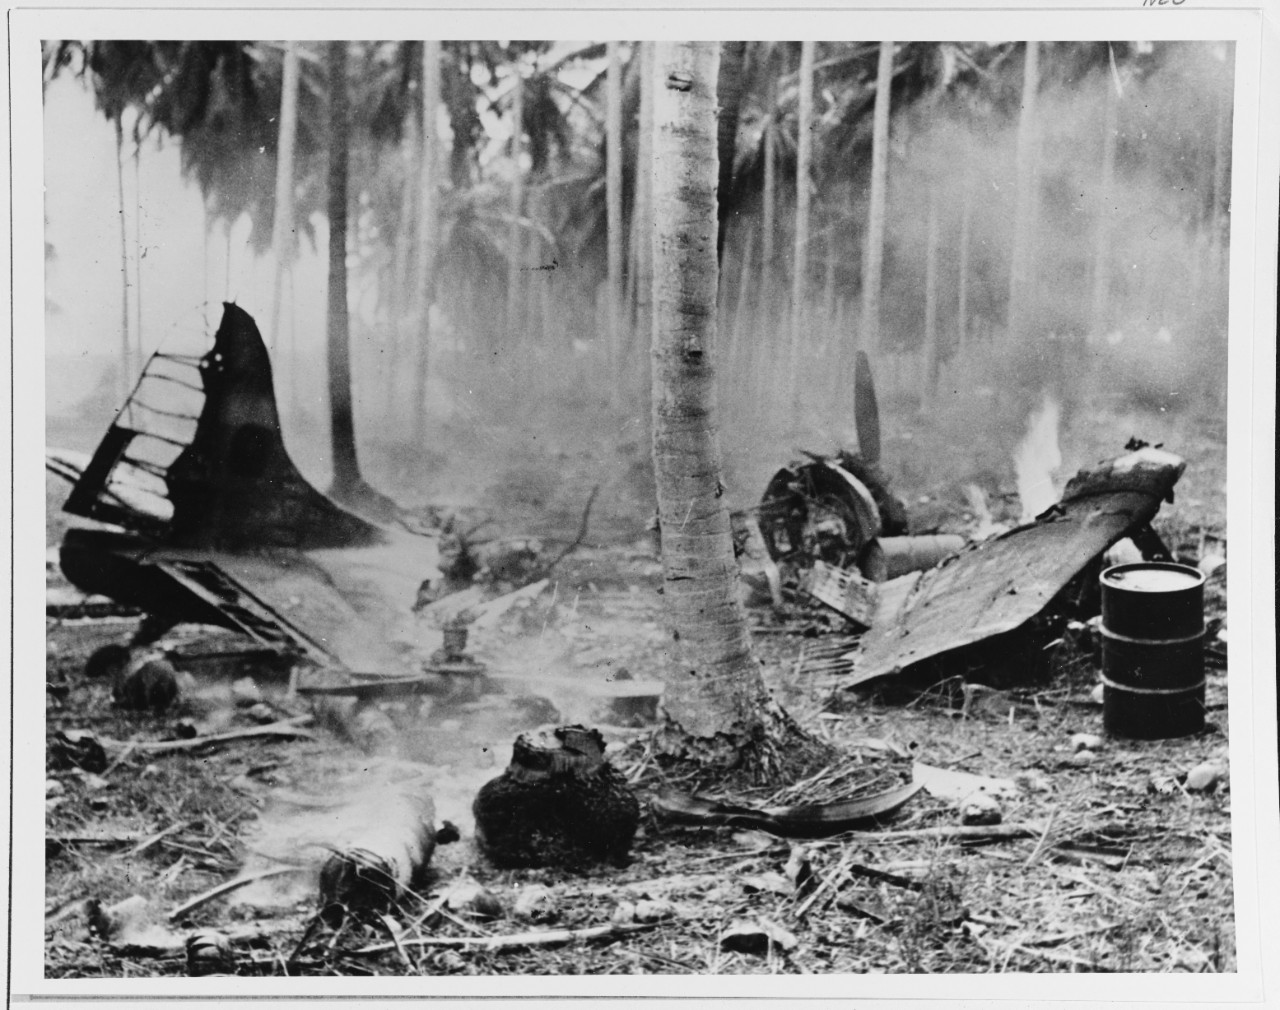 Photo #: 80-G-14409  Guadalcanal Campaign, August 1942 -- February 1943